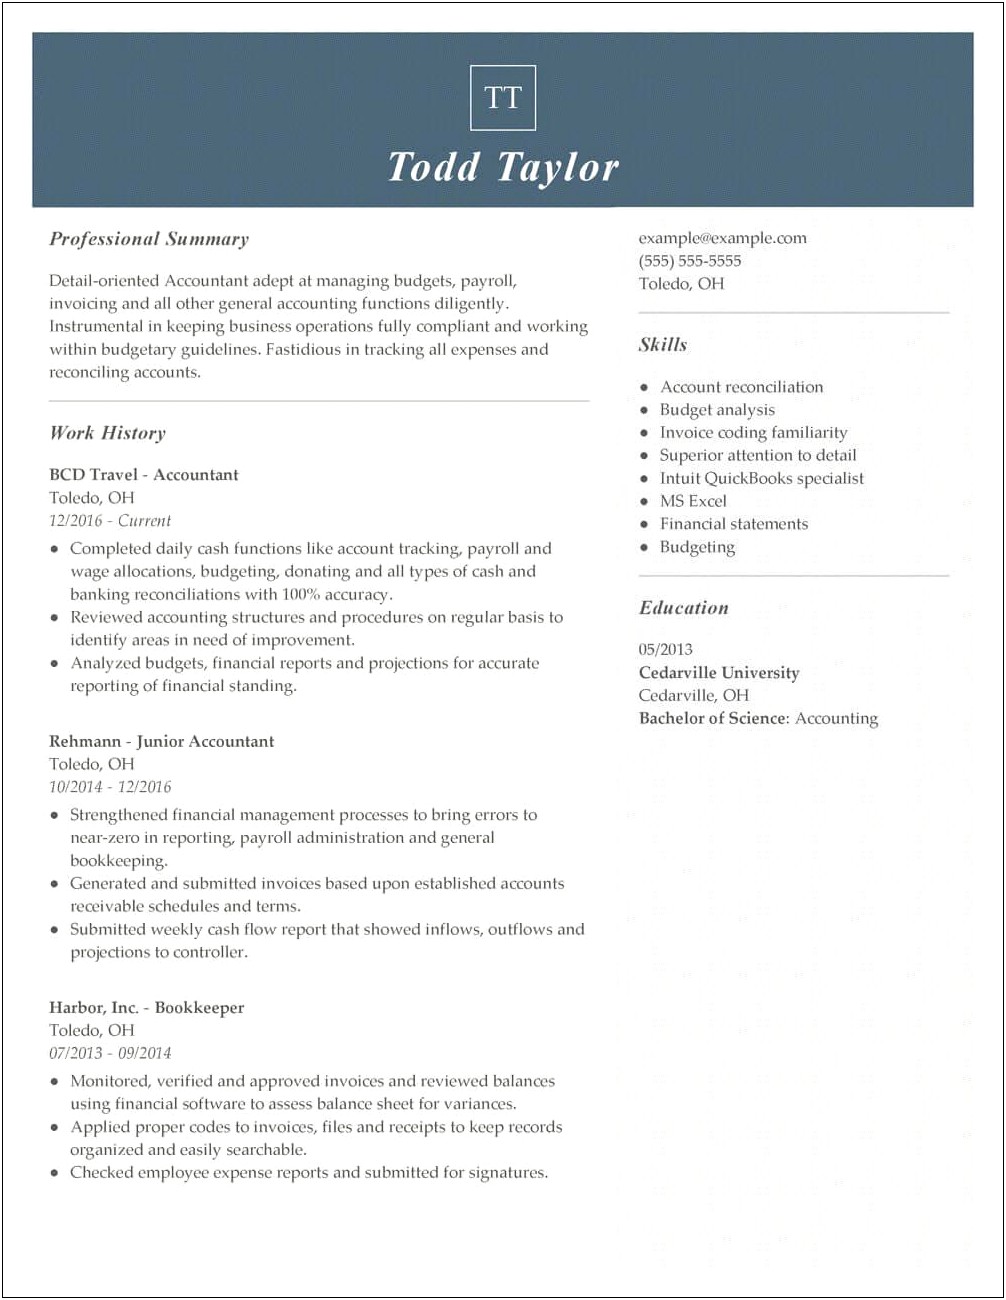 Examles To Write In Professional Summary For Resume